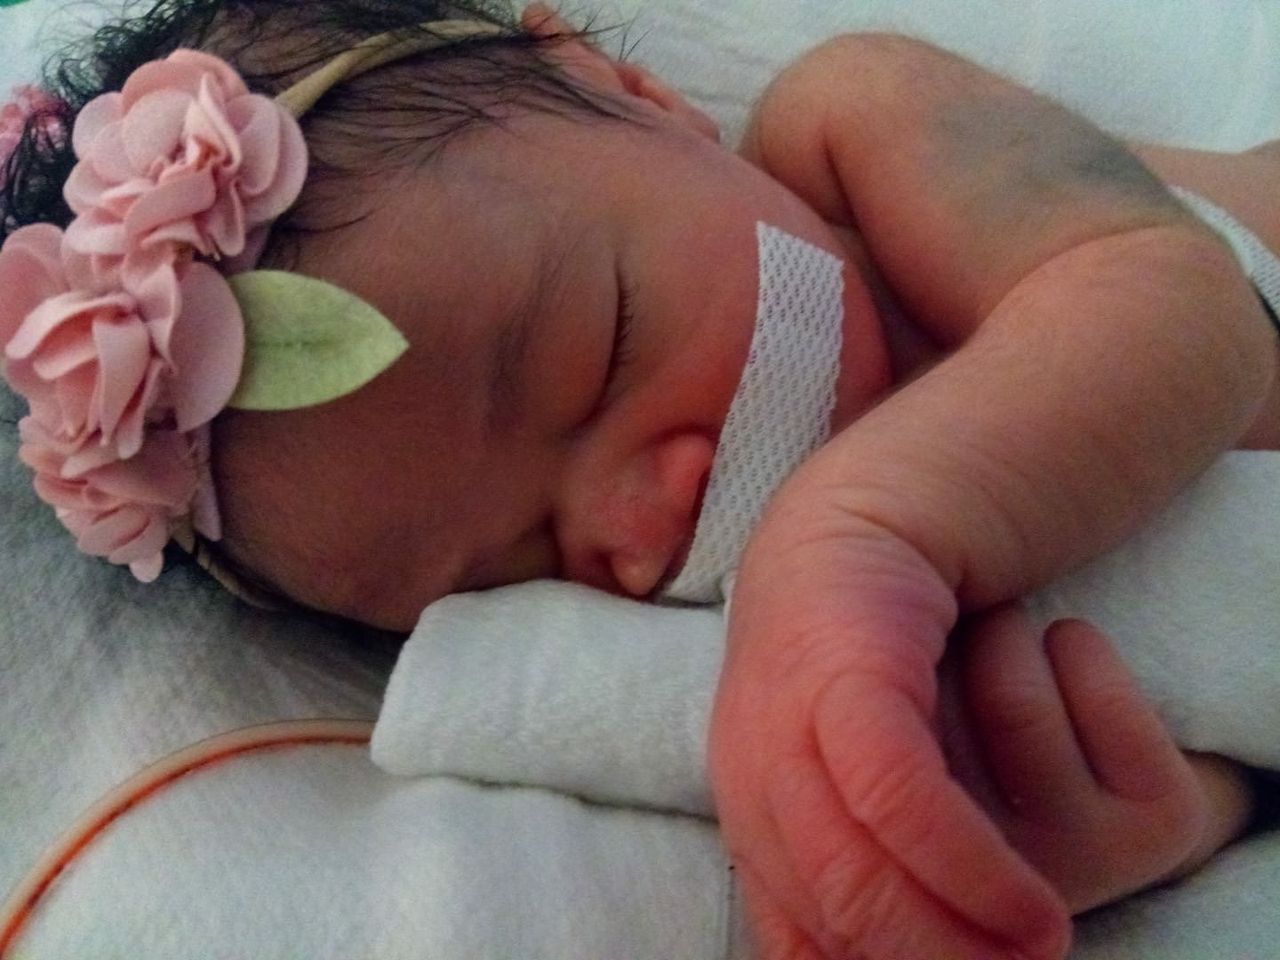 Baby Delashon was delivered via an emergency C-section after her mother was fatally shot.